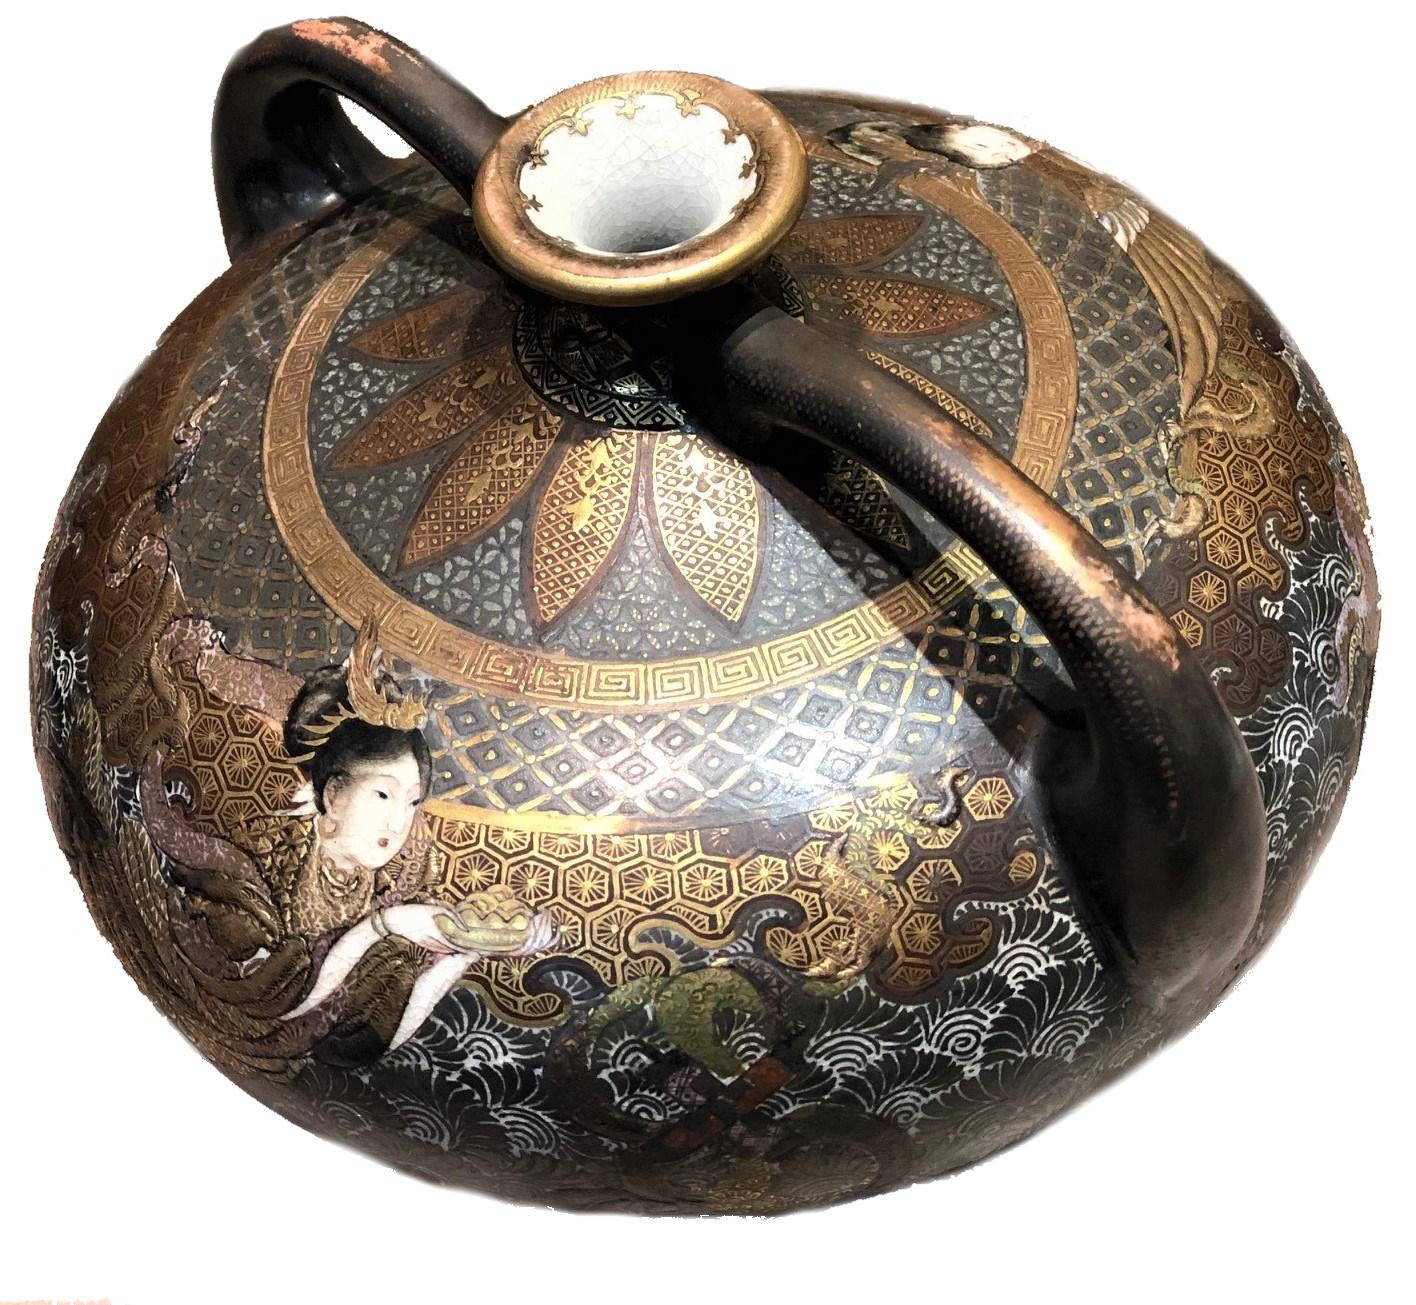 This beautiful end of Meiji Period Japanese Kyoto Fuzan Satsuma Ware double-handled vase has a gold plated intricate infinite circular relief pattern design and two images of goddess on both sides of the vessel.

Dimensions:
Height: 5.75 inches